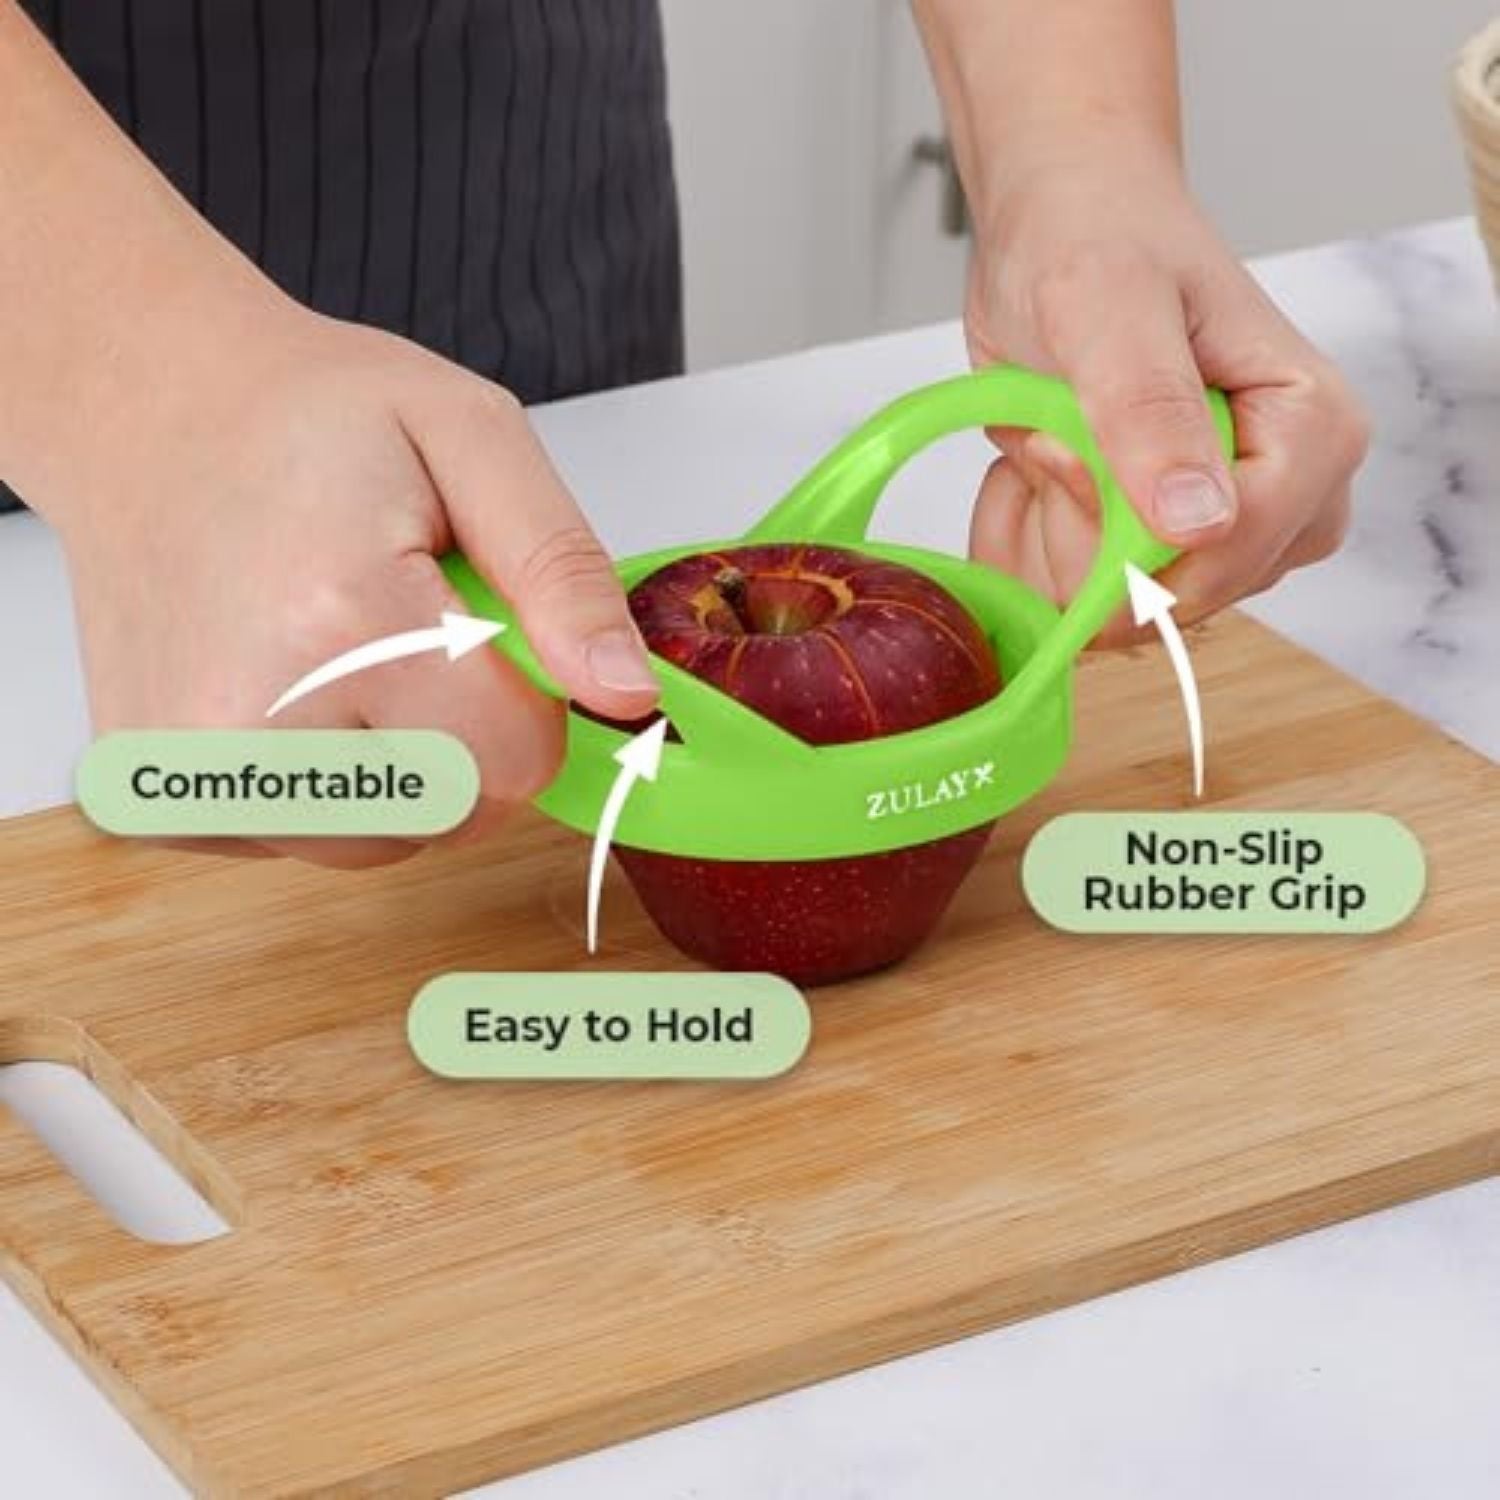 easy to hold Apple corer